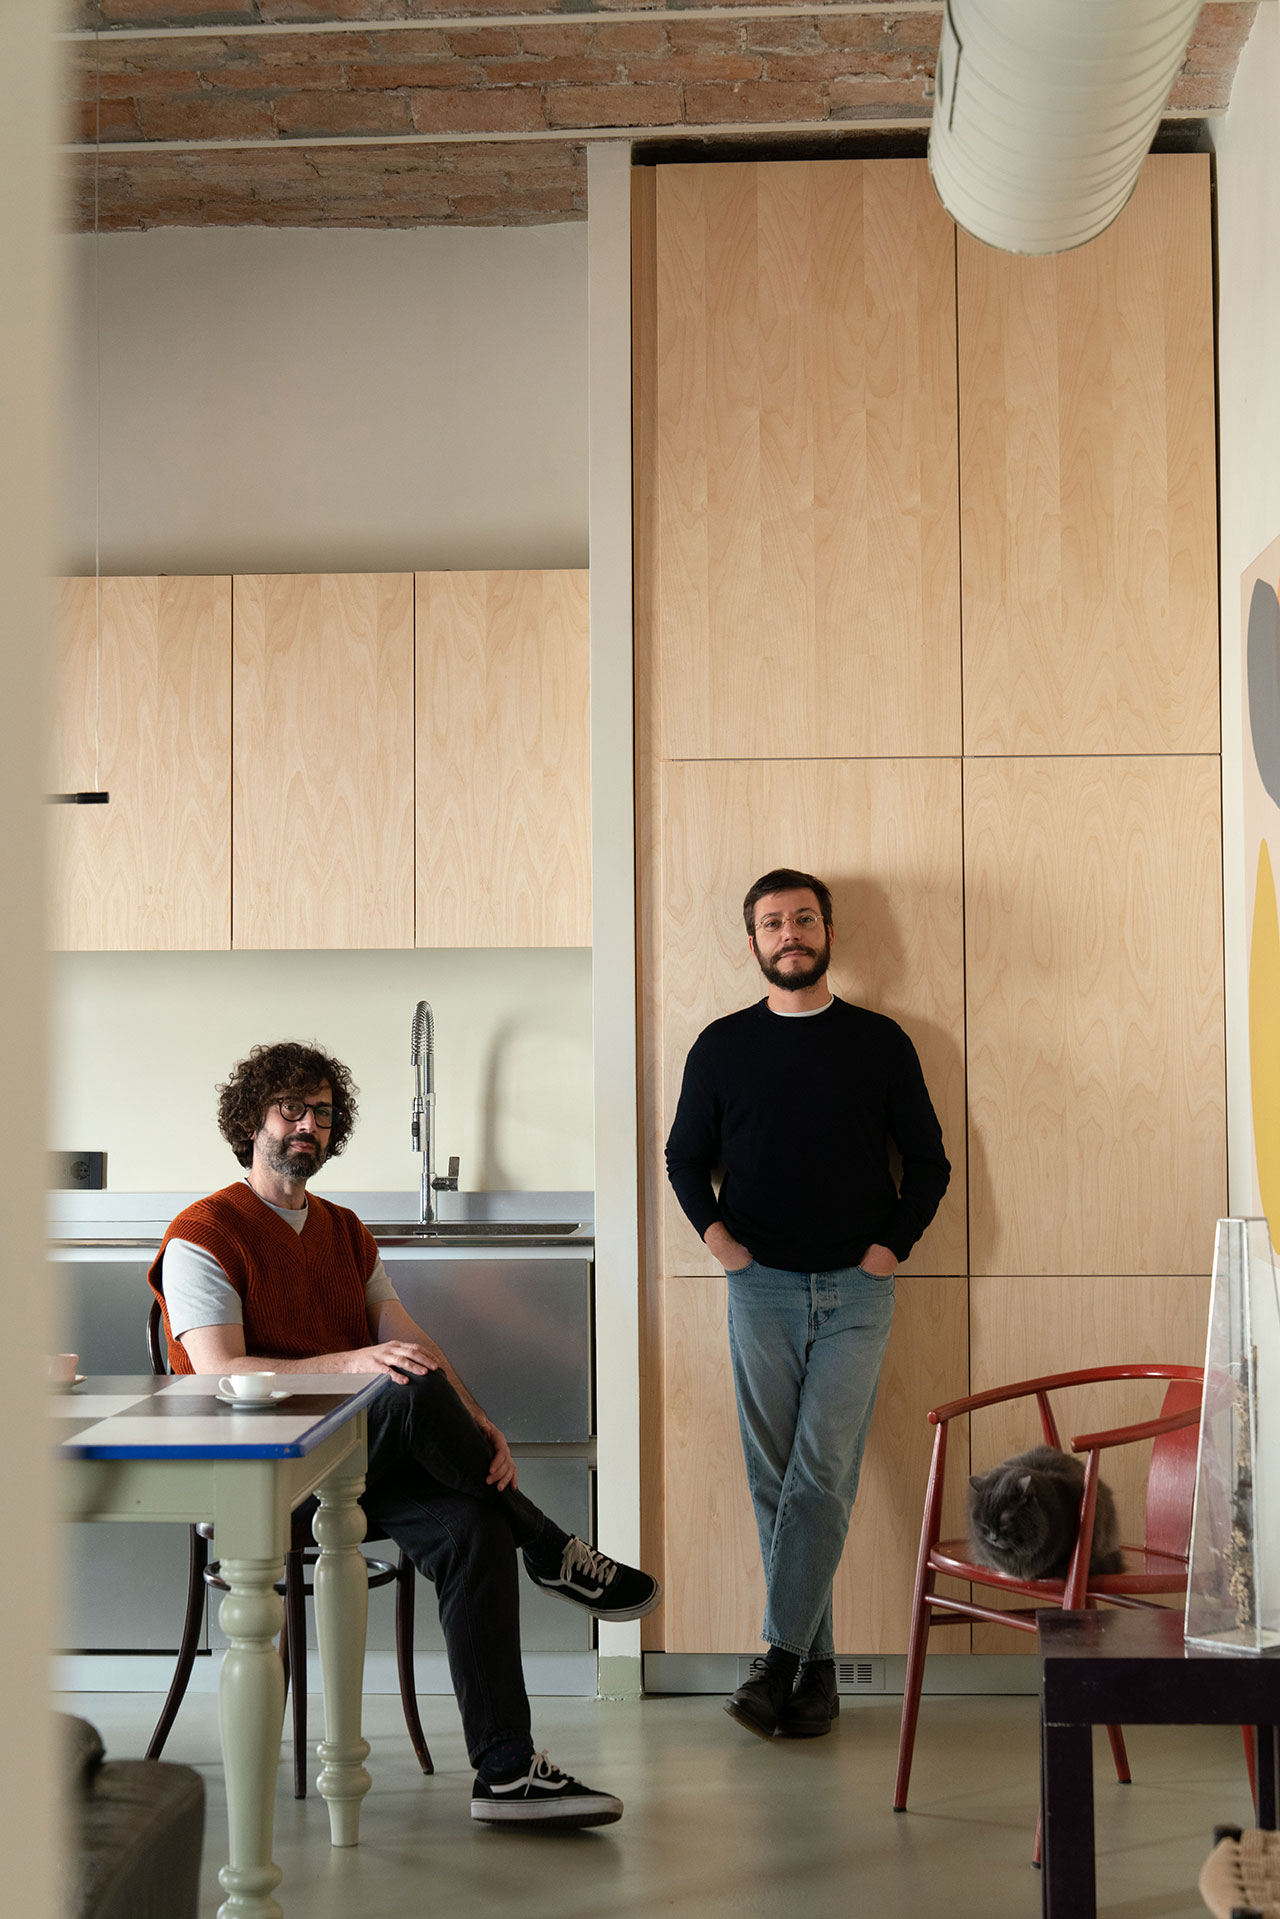 The owners — Sergio Marras and Matteo Soddu, co-founder of STUDIOTAMAT.
Photography © Seven H. Zhang.